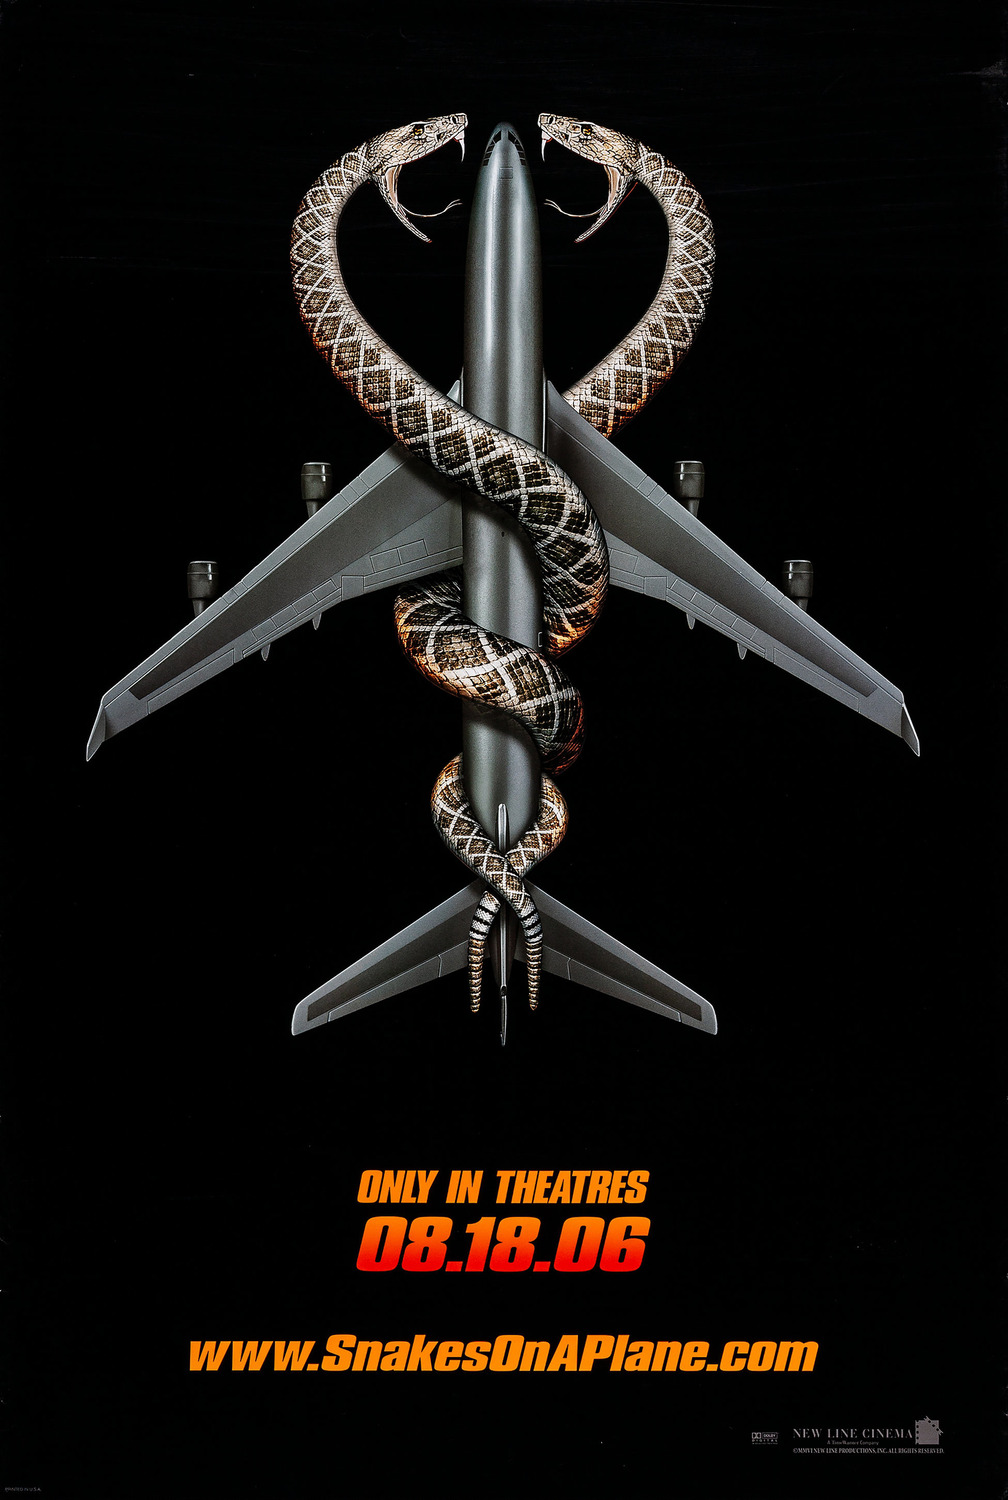 Extra Large Movie Poster Image for Snakes on a Plane (#1 of 8)